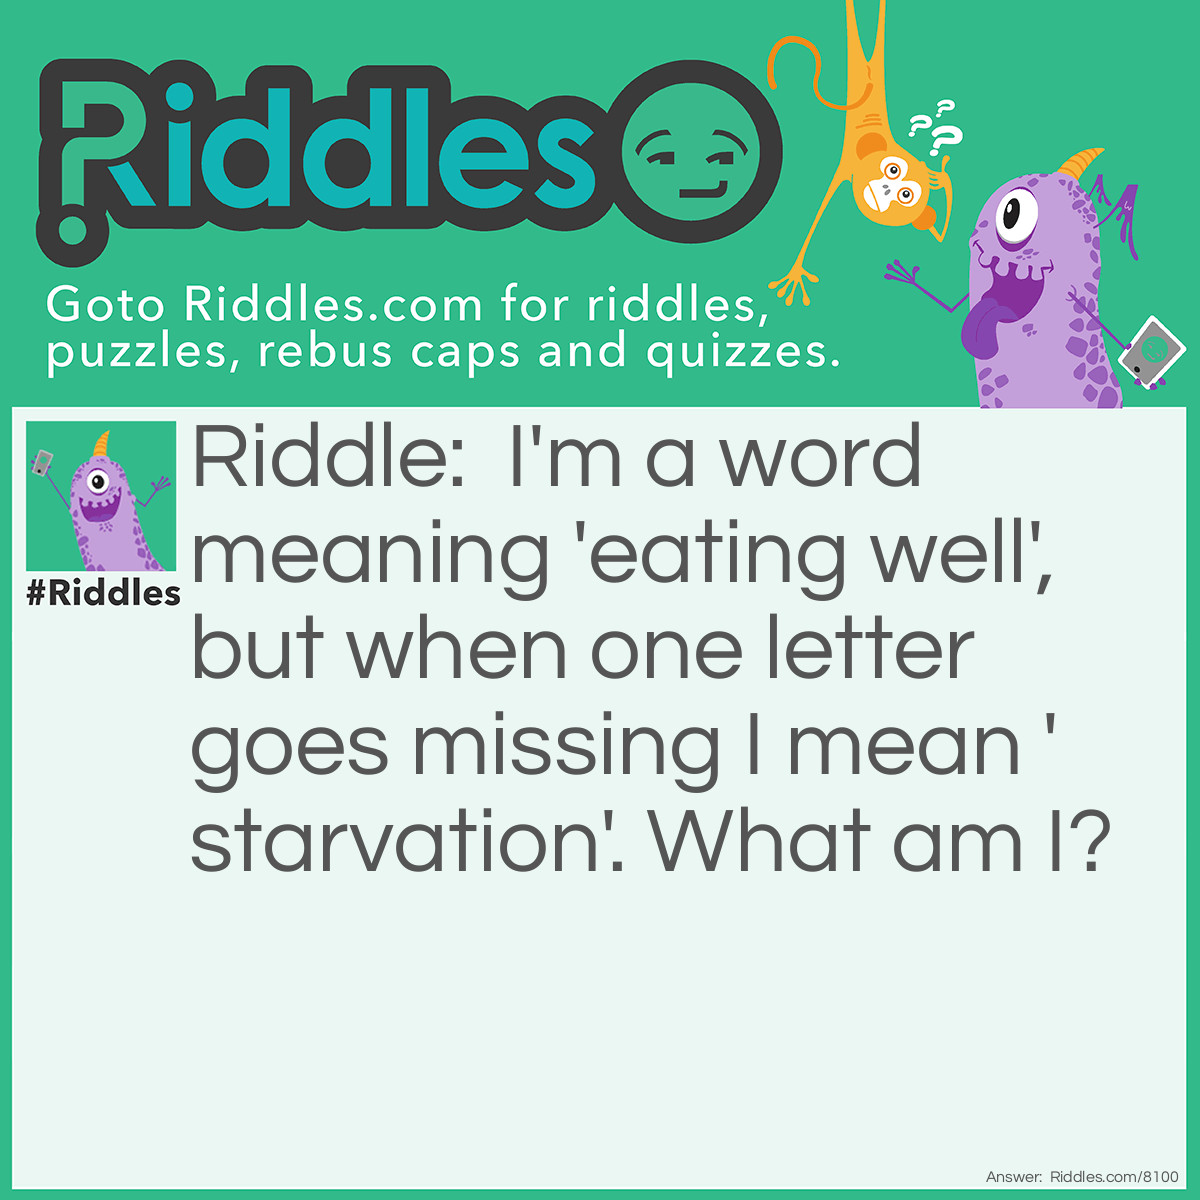 Riddle: I'm a word meaning eating well, but when one letter goes missing I mean starvation. What am I? Answer: <span class="_5mdd">Feast (fast)</span>.